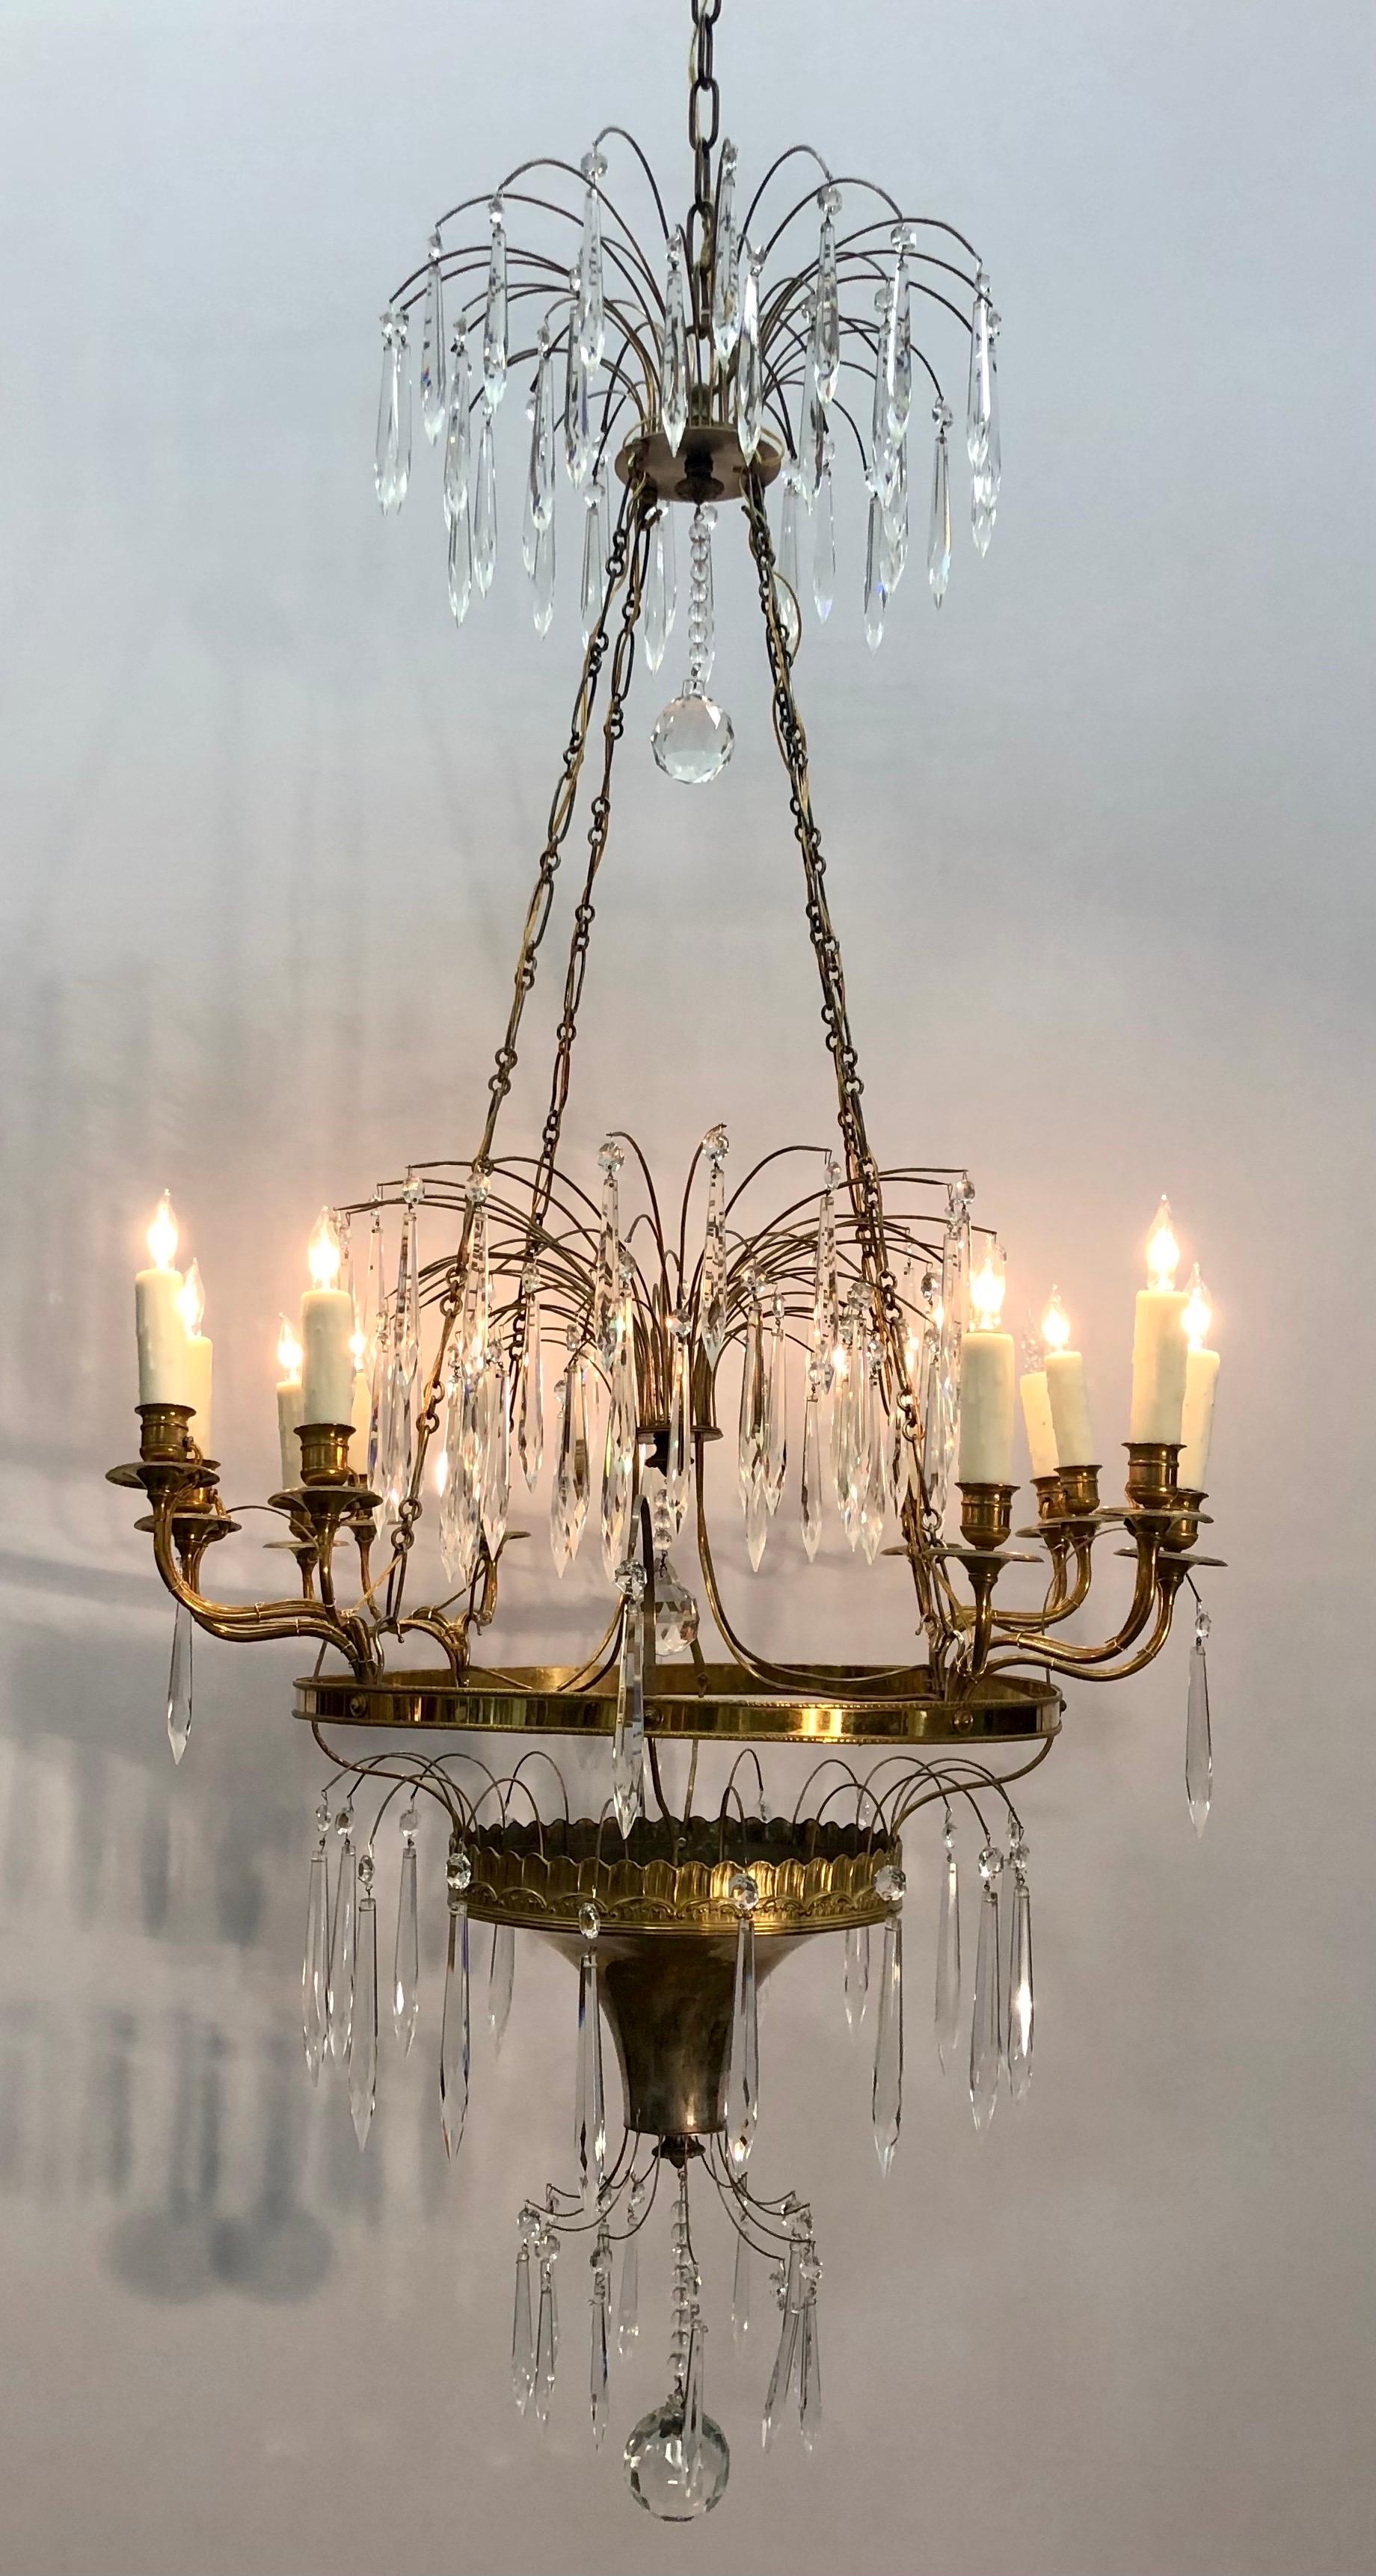 This Regal Gustavian Period Chandelier in the Russian Imperial Style has twelve candle branches and is fashioned in doré bronze, silverplated bronze, and is pinned with faceted icicle crystal pendants. The elegant corona has bronze sprays with